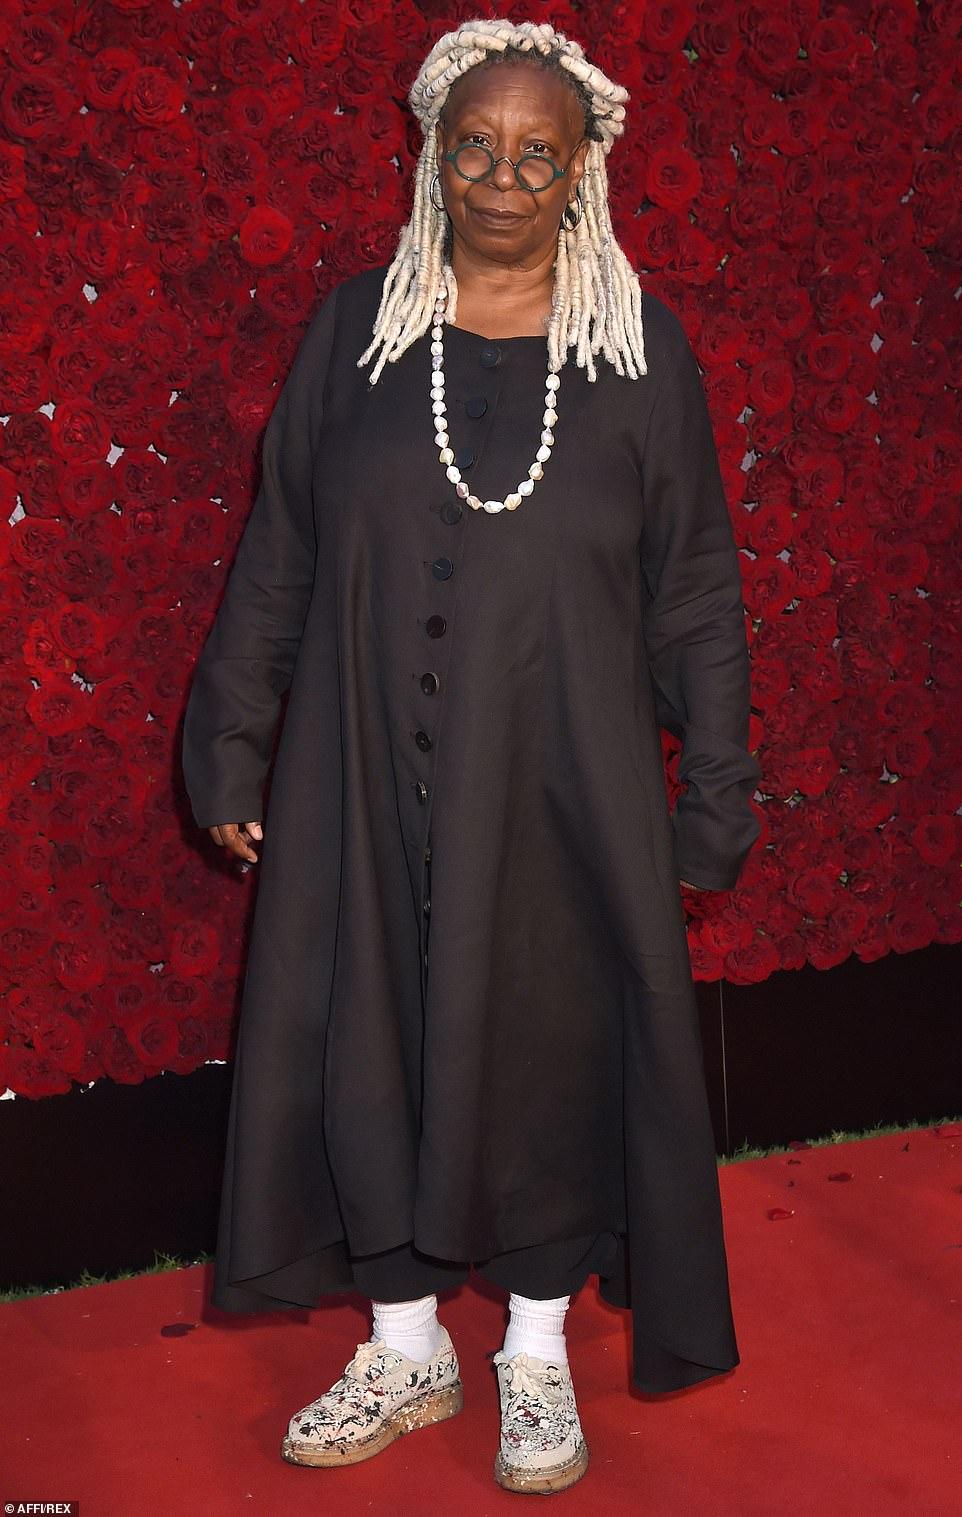   Whoopi Goldberg -Getty Images